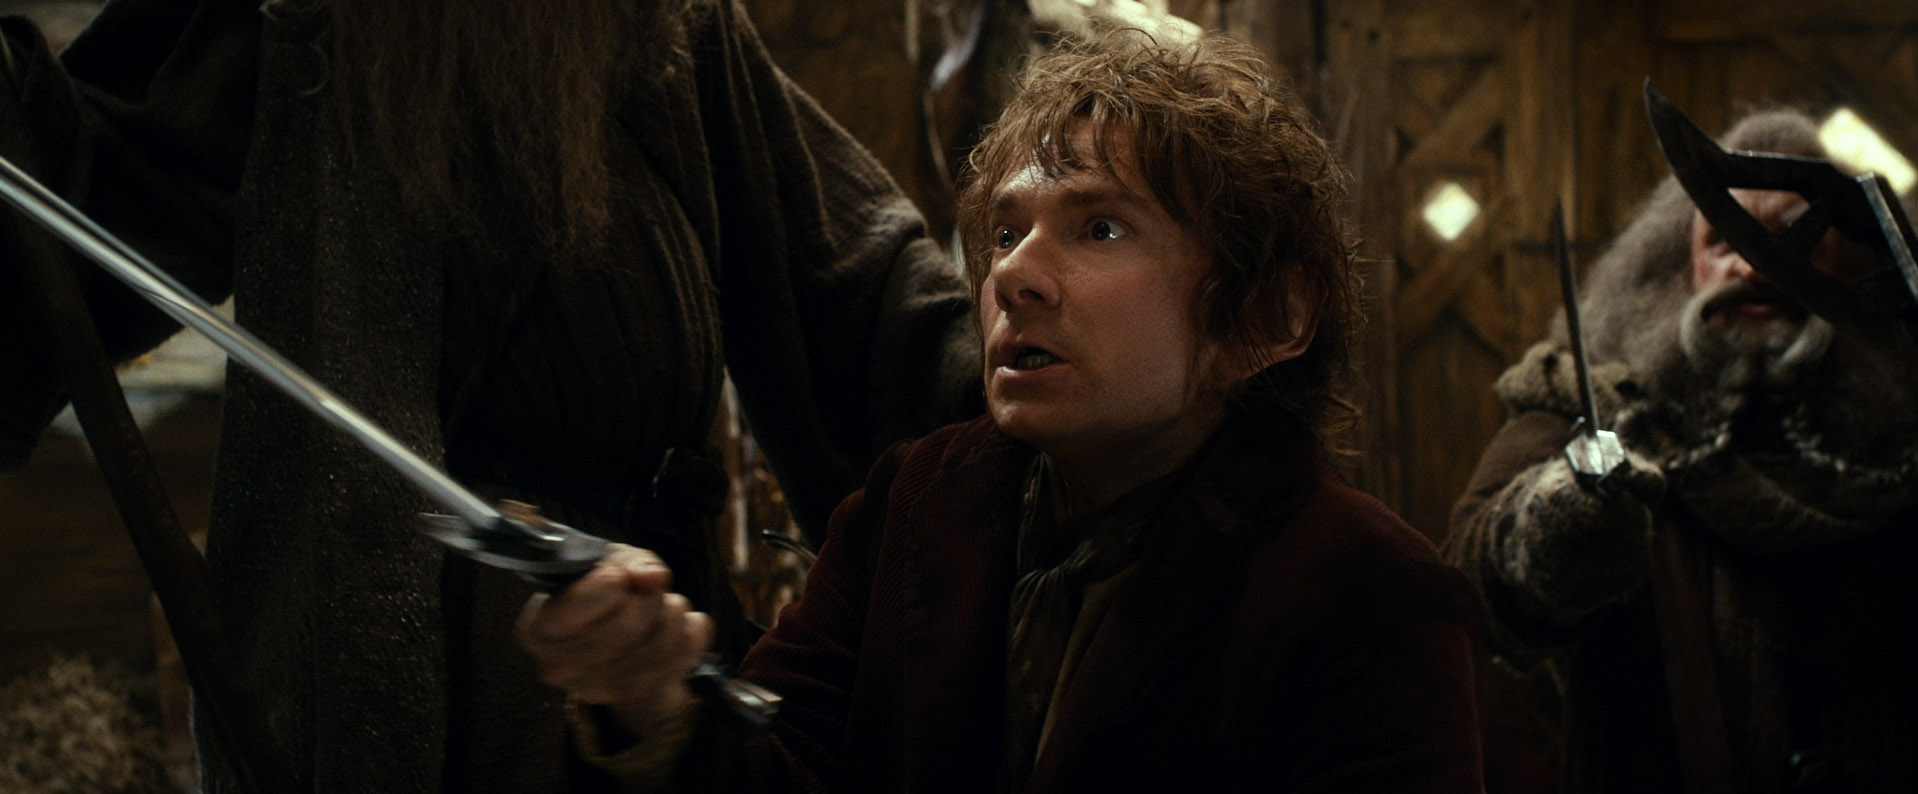 new-image-from-the-hobbit-the-desolation-of-smaug-6.jpg